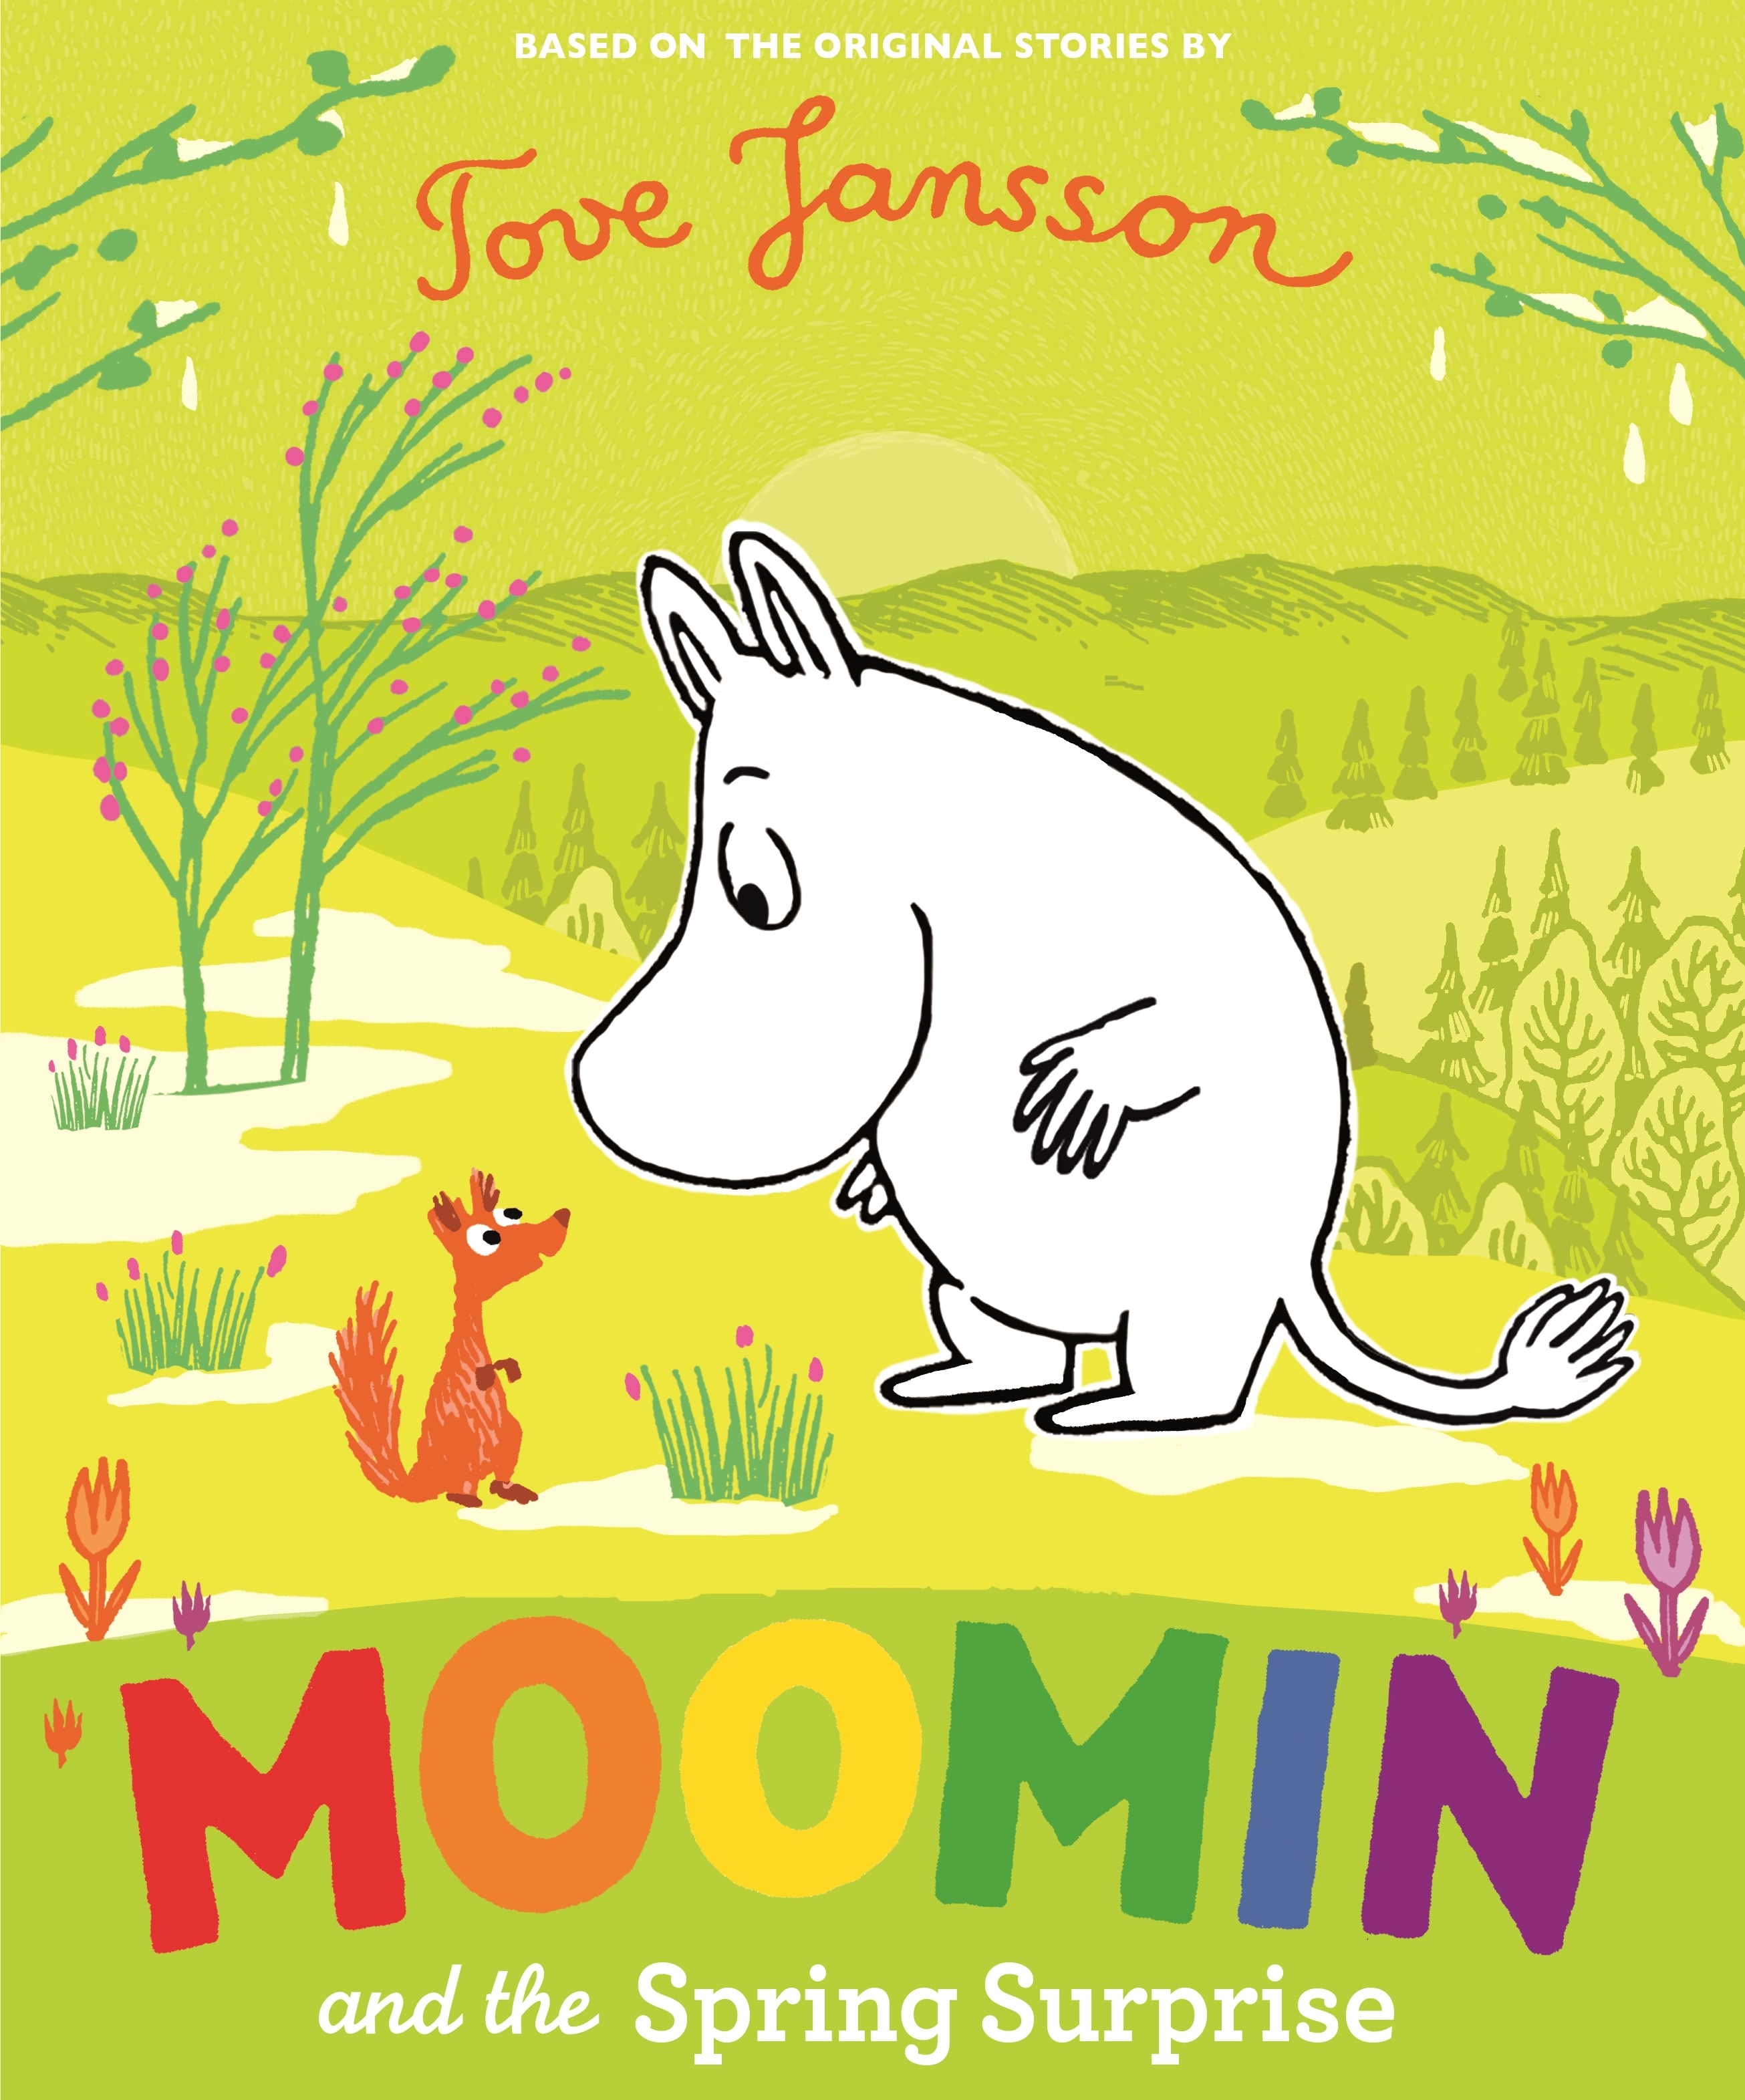 Book “Moomin and the Spring Surprise” by Tove Jansson — April 9, 2020